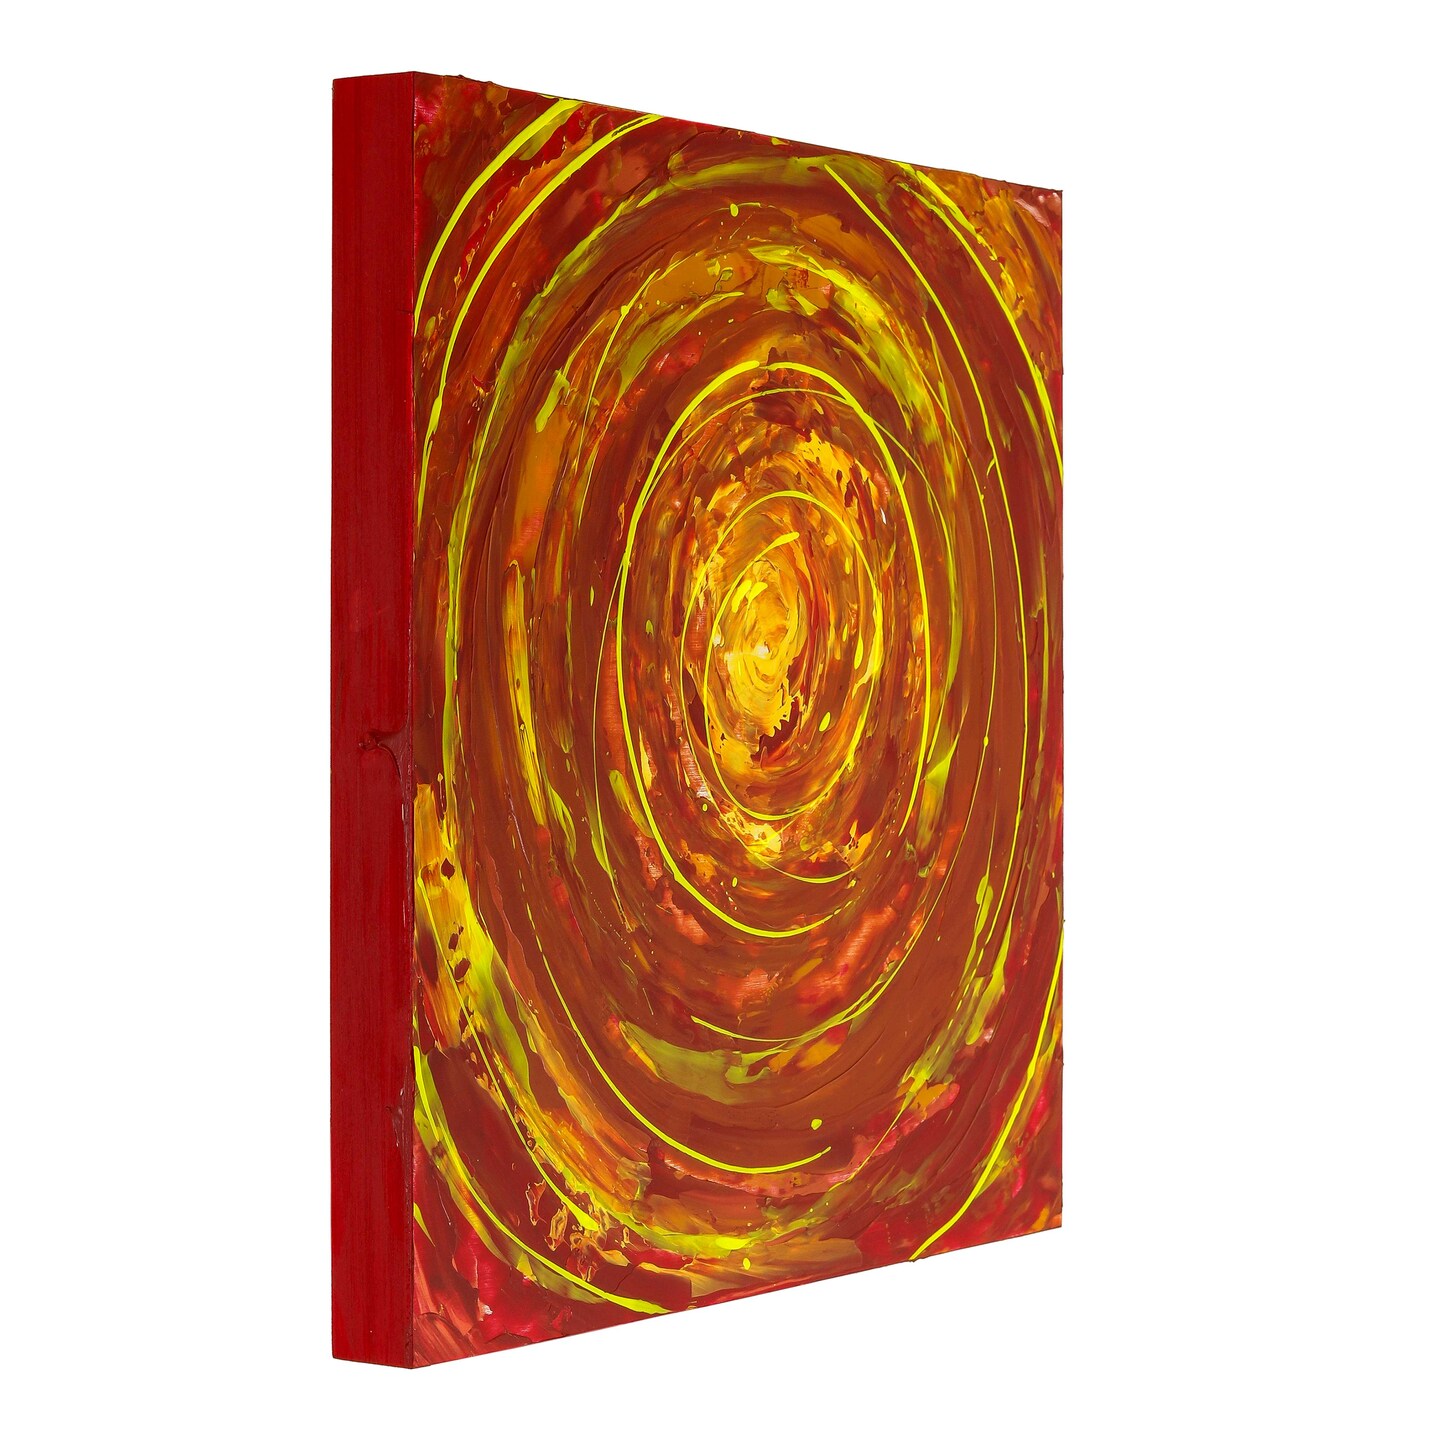 20&#x22; x 20&#x22; Birch Wood Paint Pouring Panel Boards, Gallery 1-1/2&#x22; Deep Cradle (2 Pack) - Artist Depth Wooden Wall Canvases - Painting, Acrylic, Oil